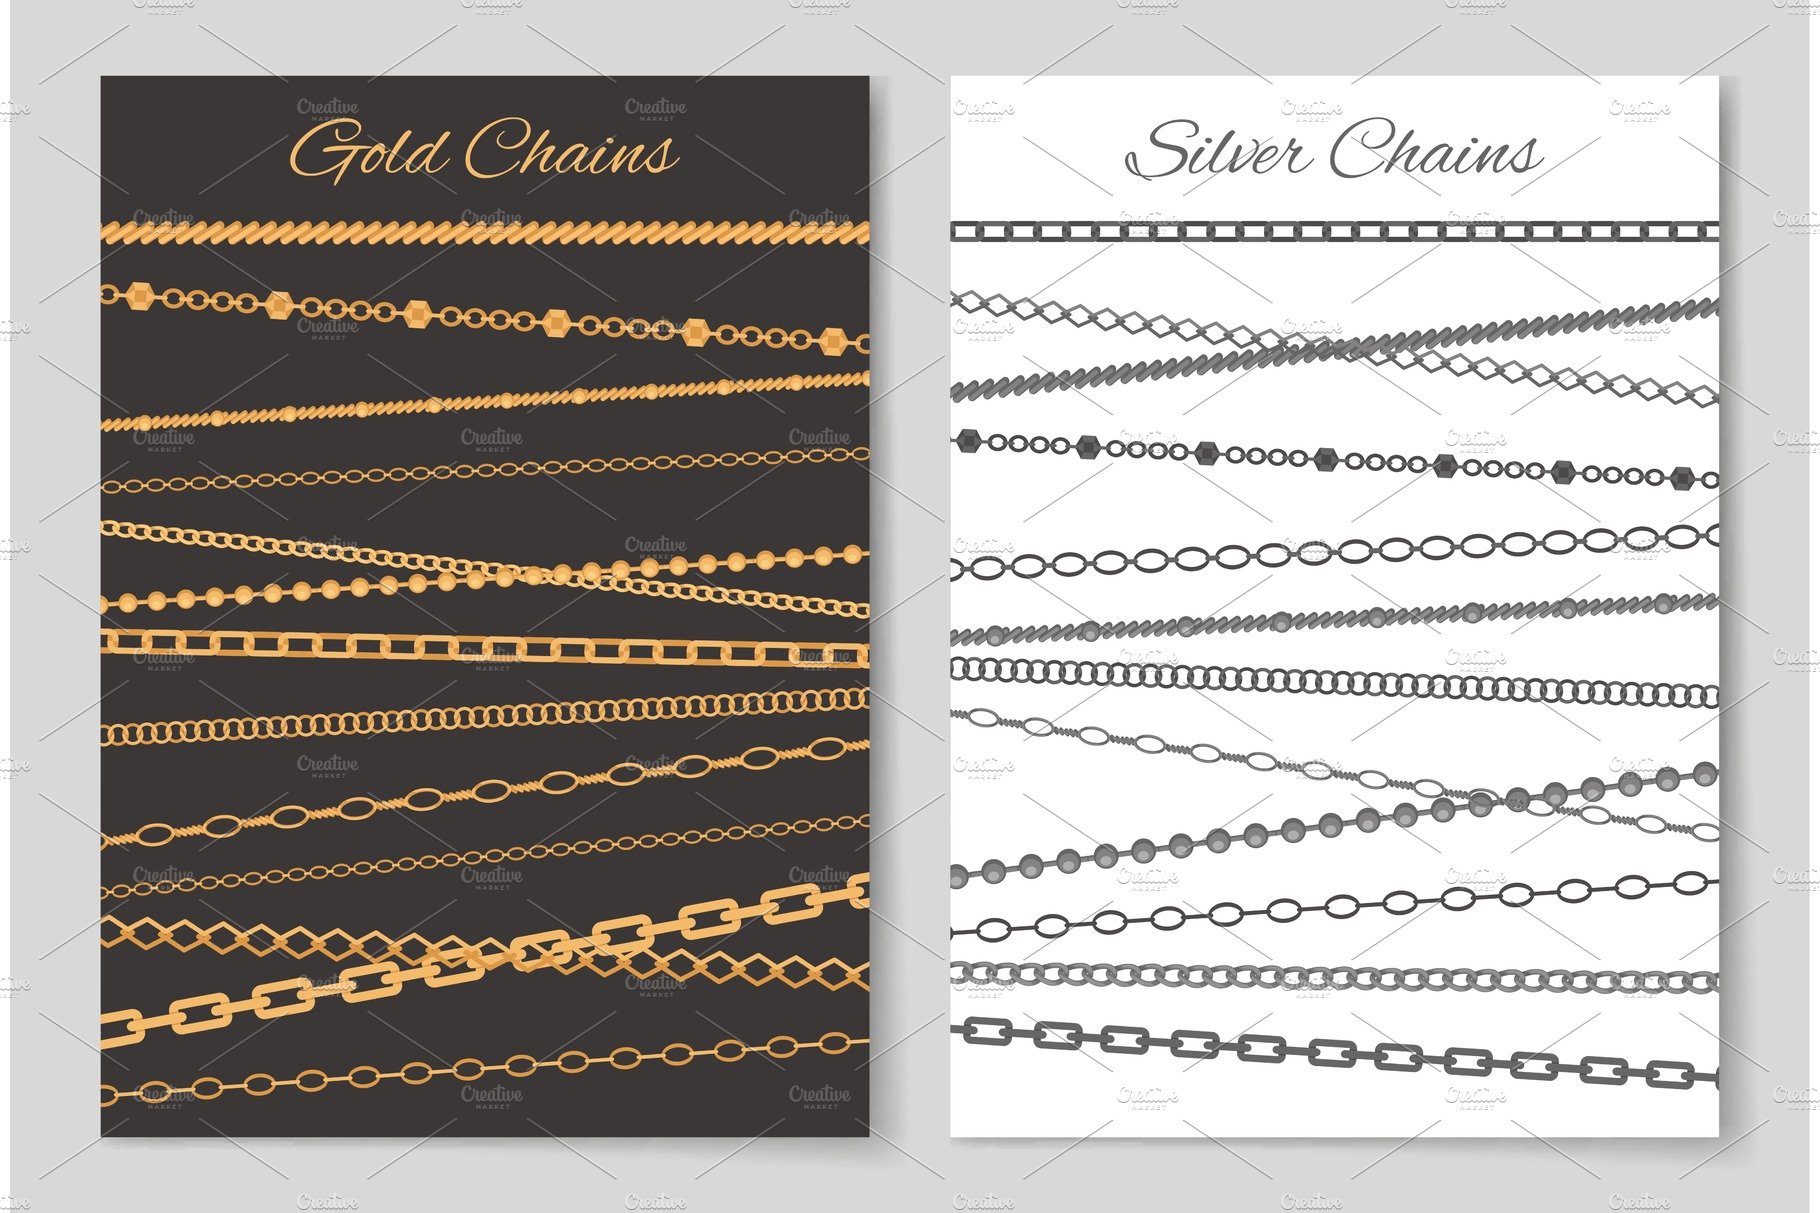 Gold and Silver Chains Advertisement cover image.